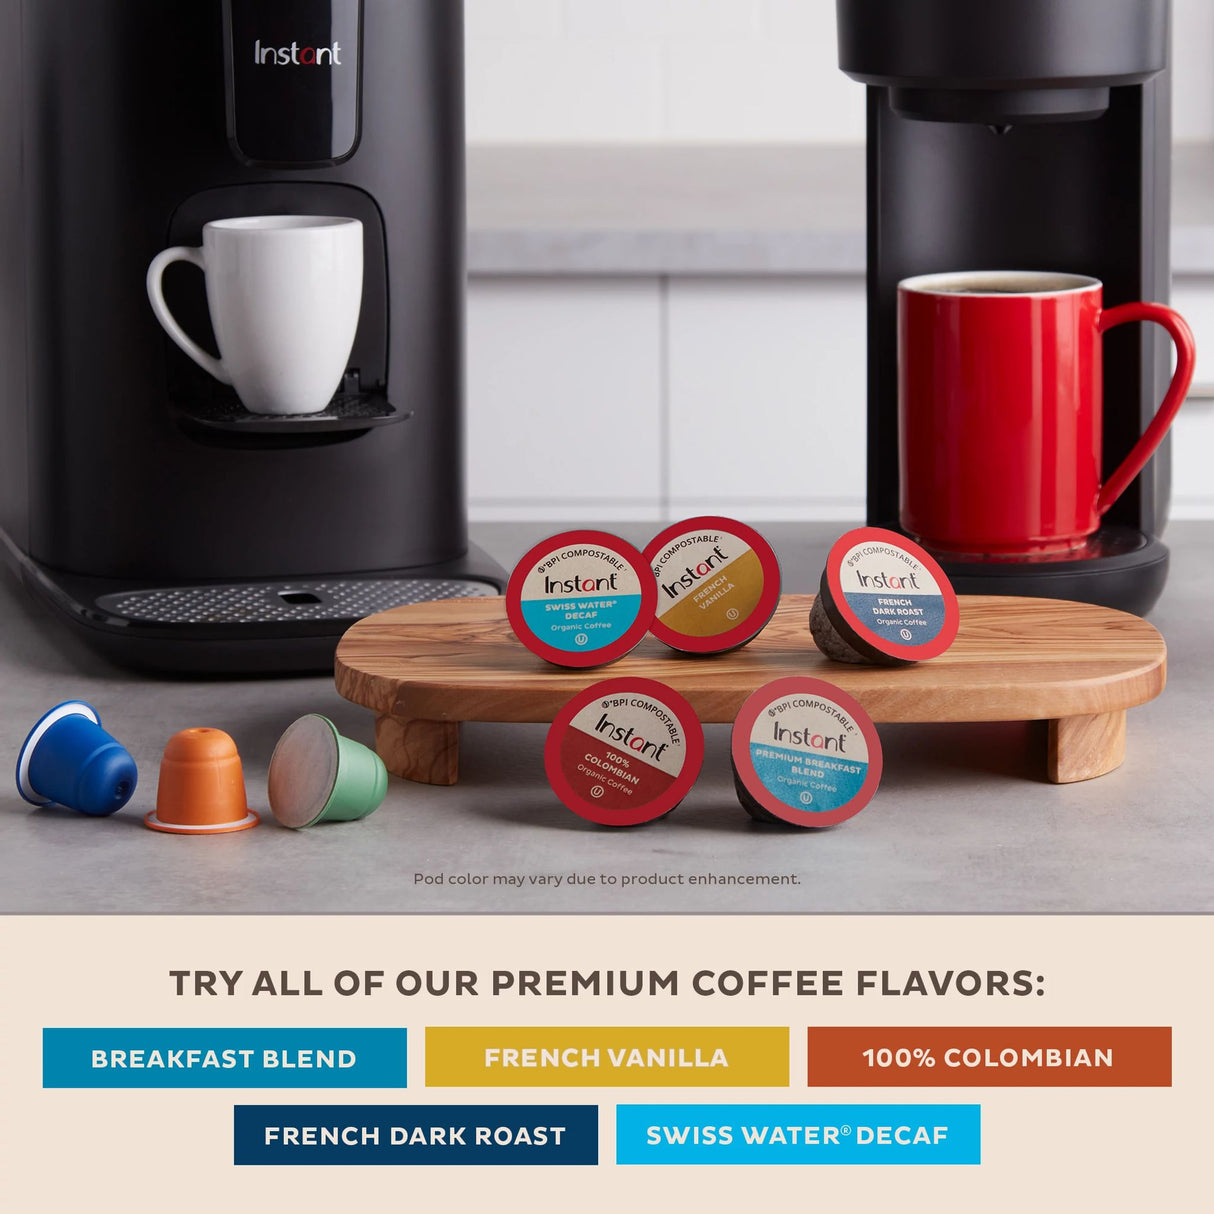  Instant French Dark Roast 30 Compostable Coffee Pods with text try all of our premium coffee flavors